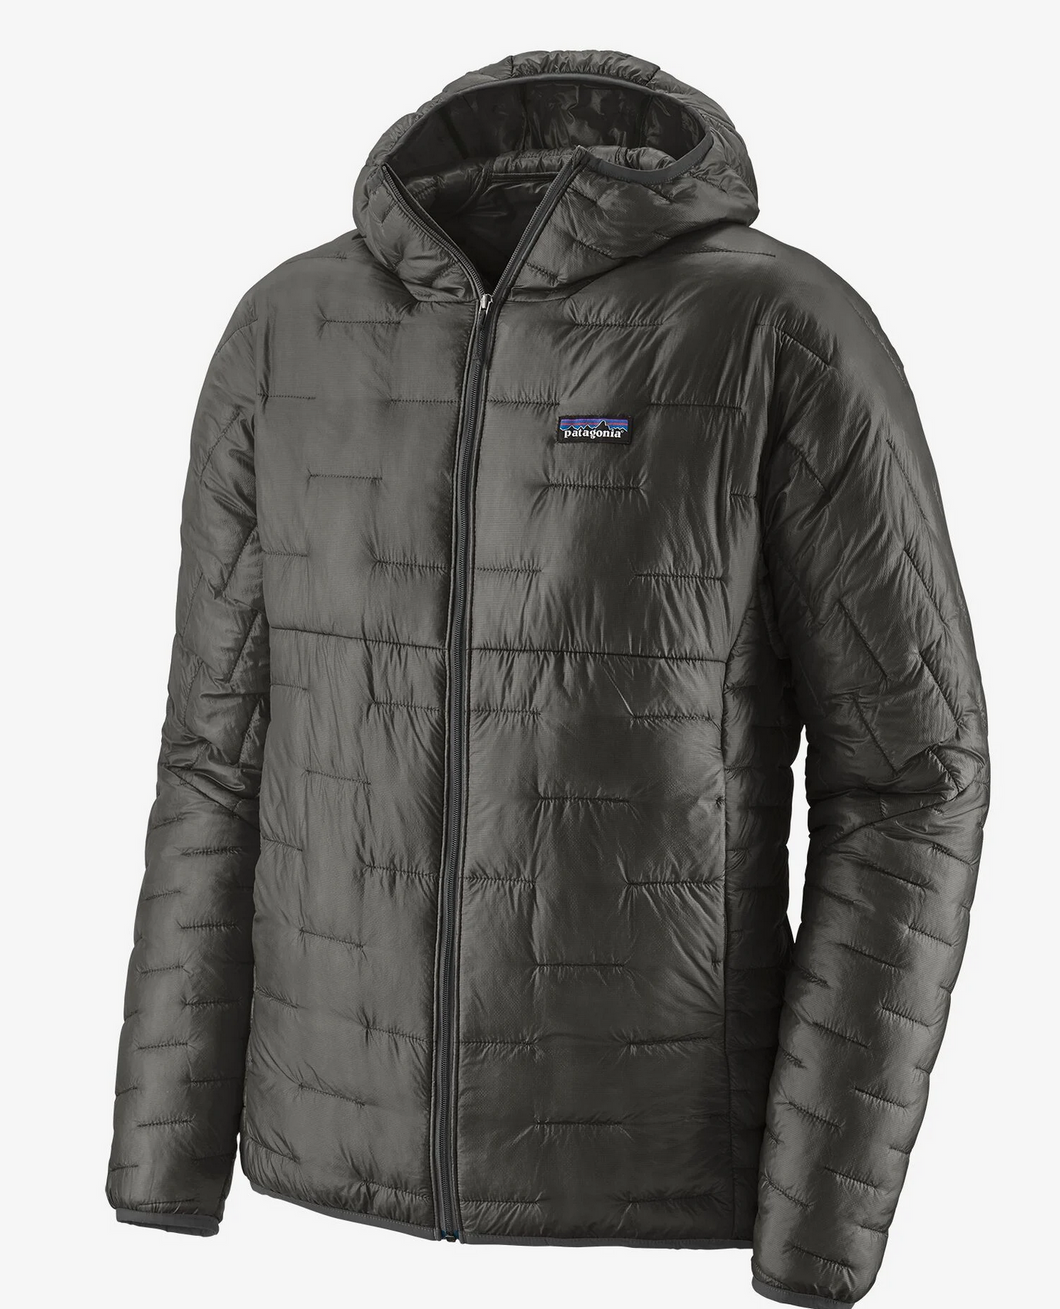 Micro puff, patagonia mens jacket with hoody.  Insulation lightweight